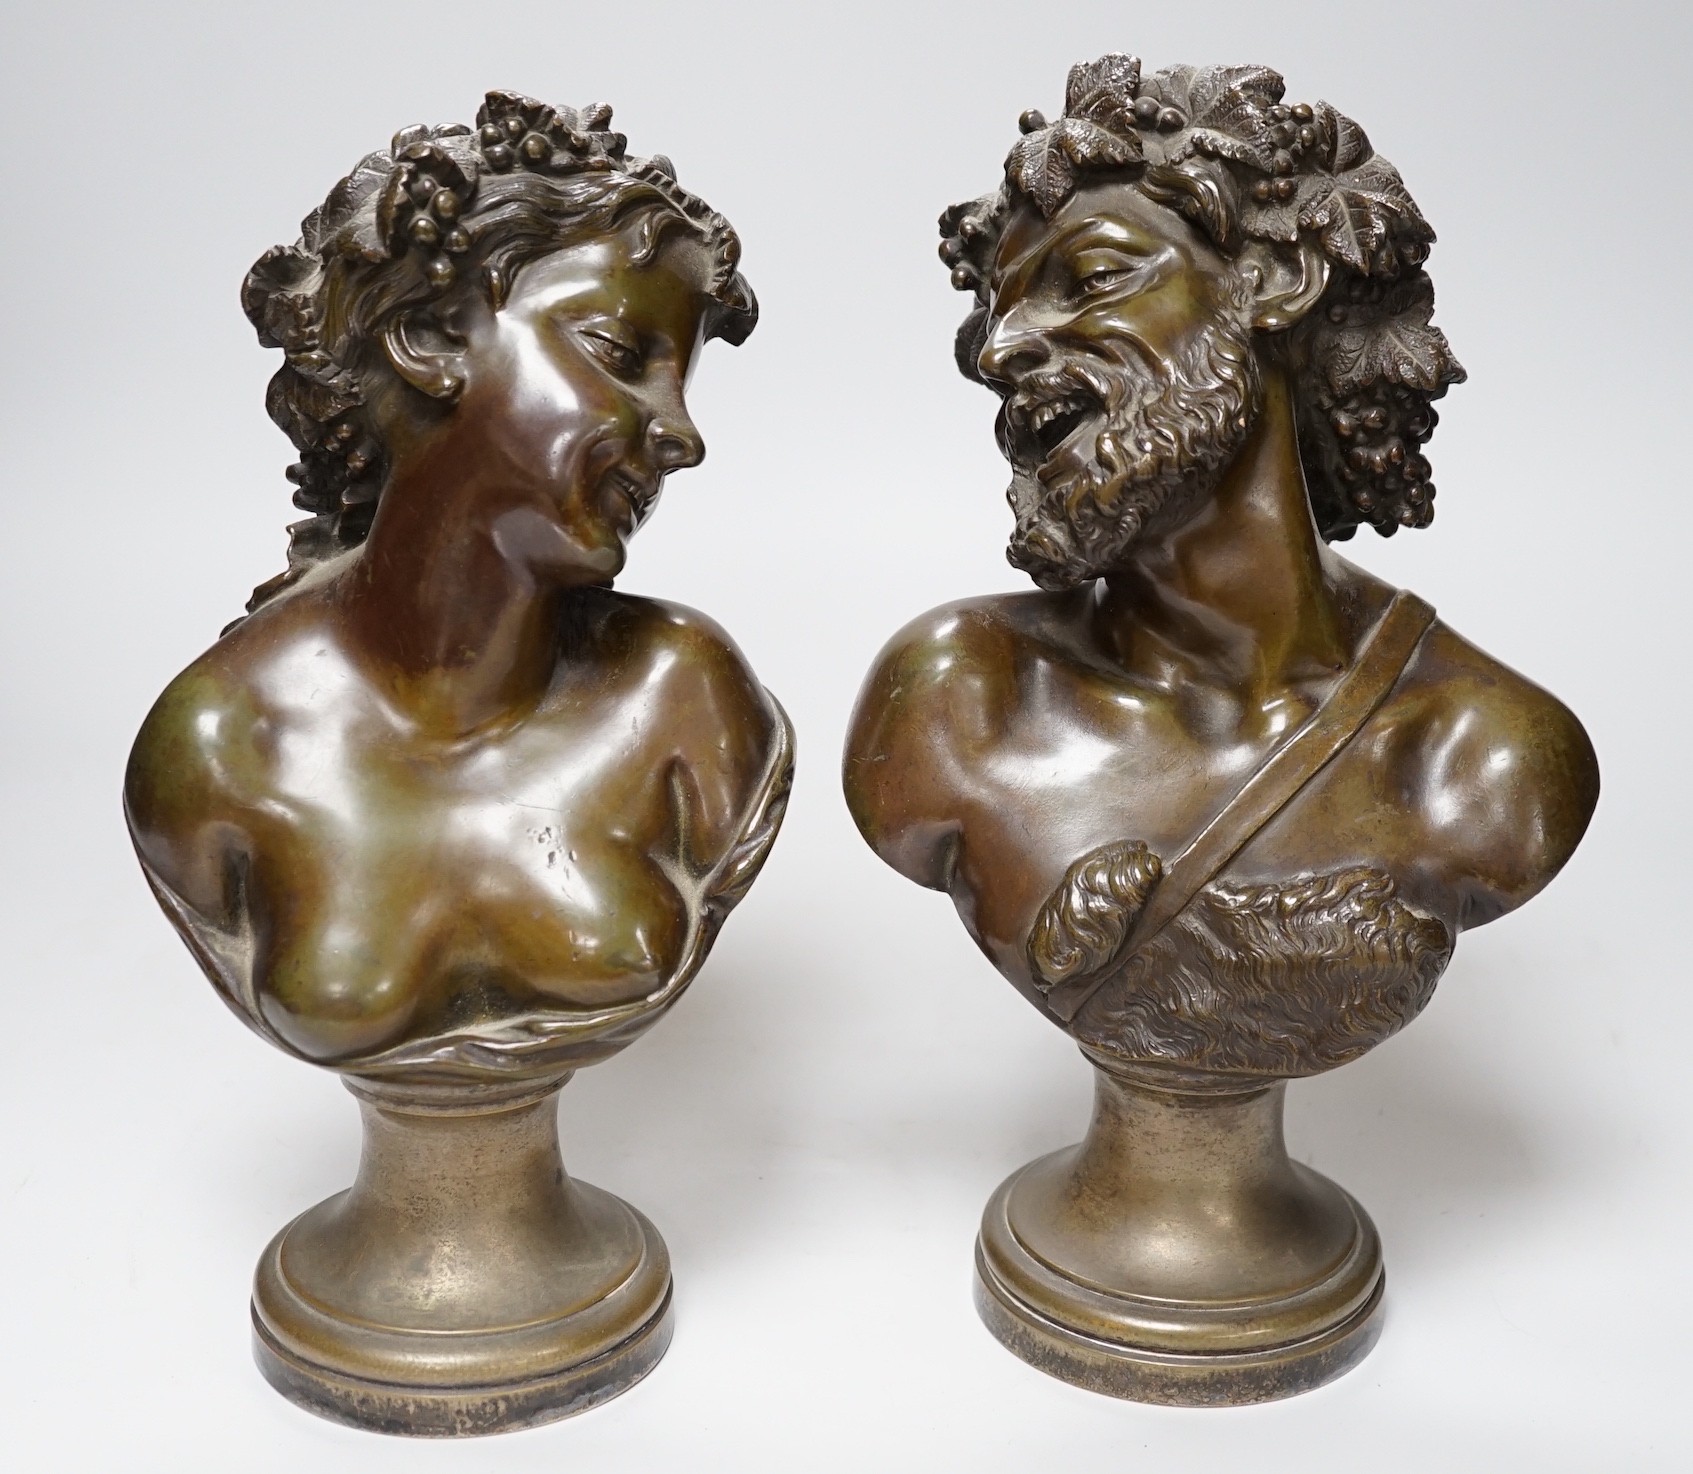 A pair of late 19th century French bronze Bacchic busts, on plated socles, 28cm